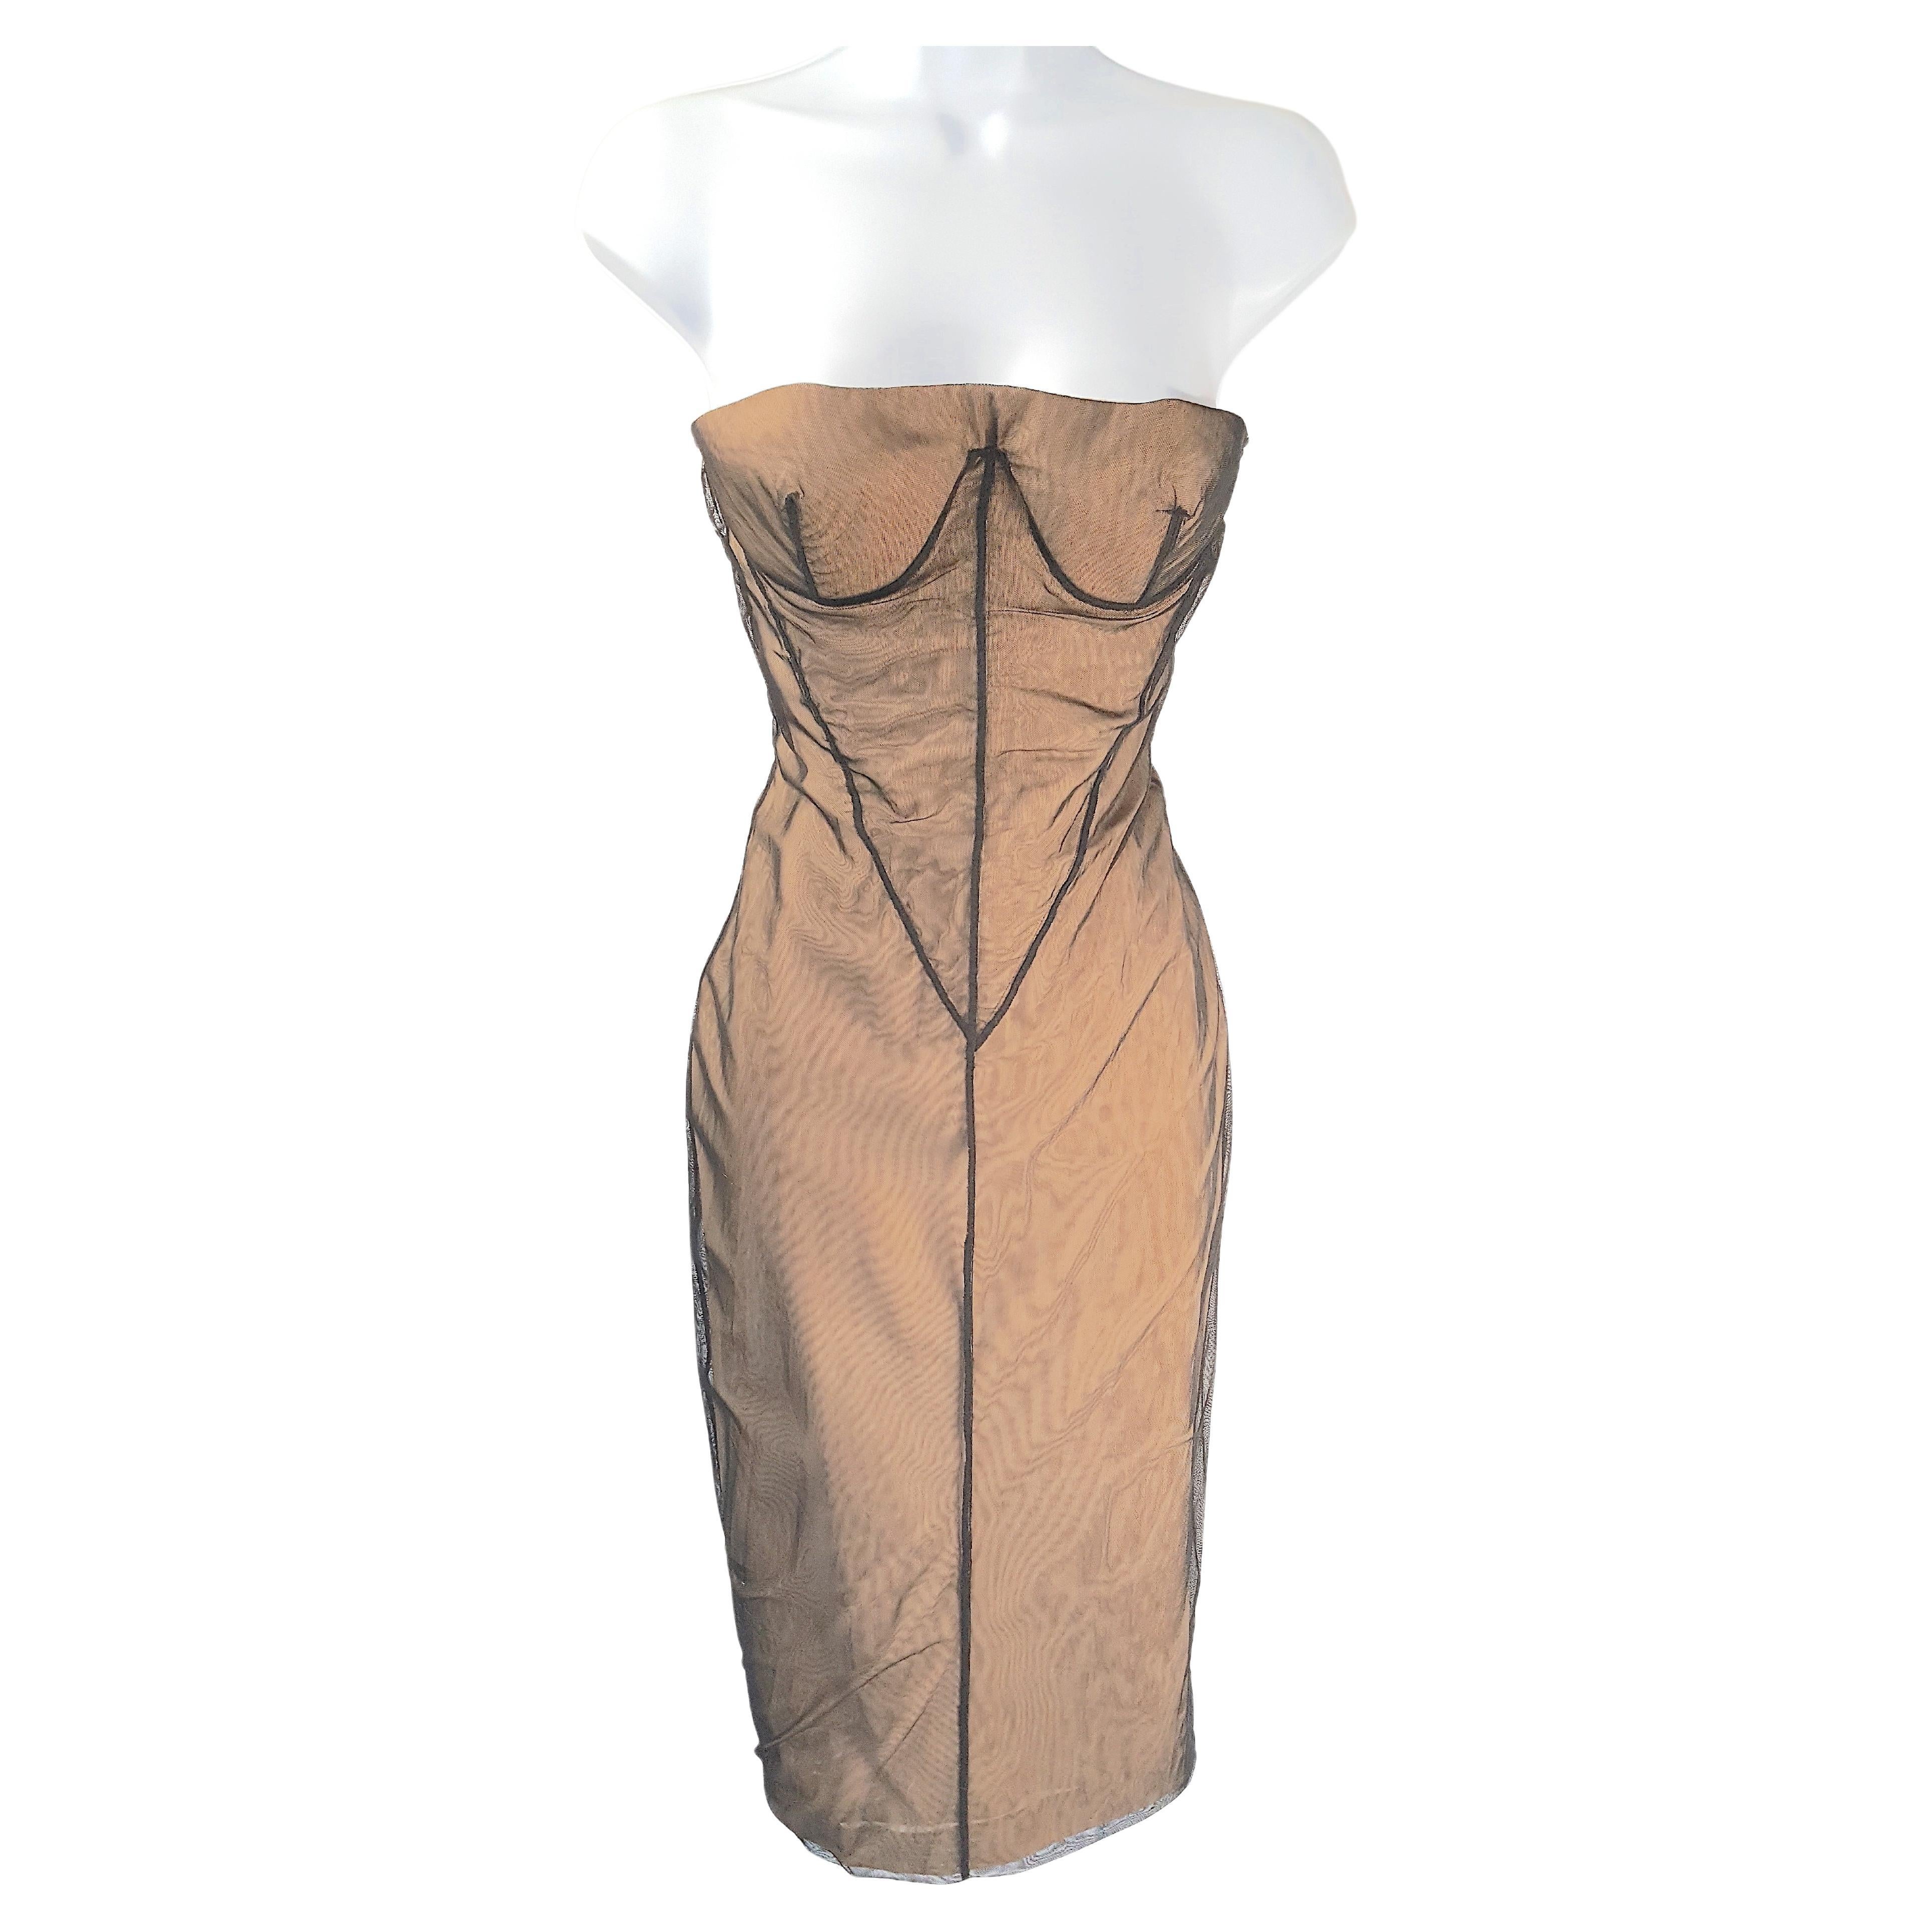 Gucci TomFord 2001 AwardYear RunwayLook2 Balconette Corset Strapless Nude Dress For Sale